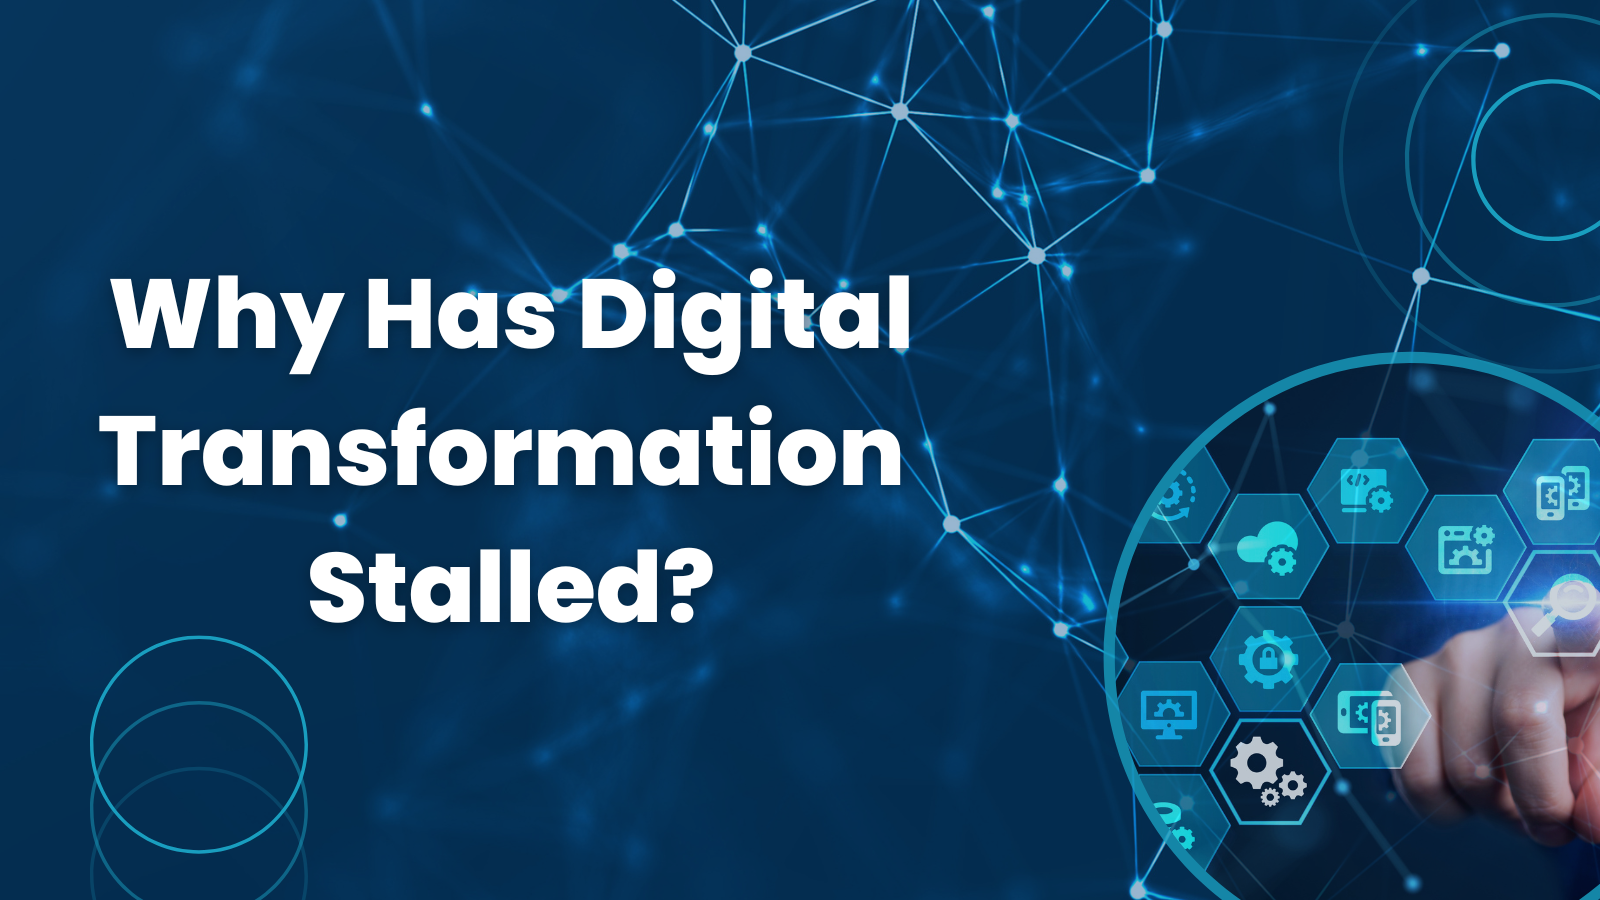 Why Has Digital Transformation Stalled?